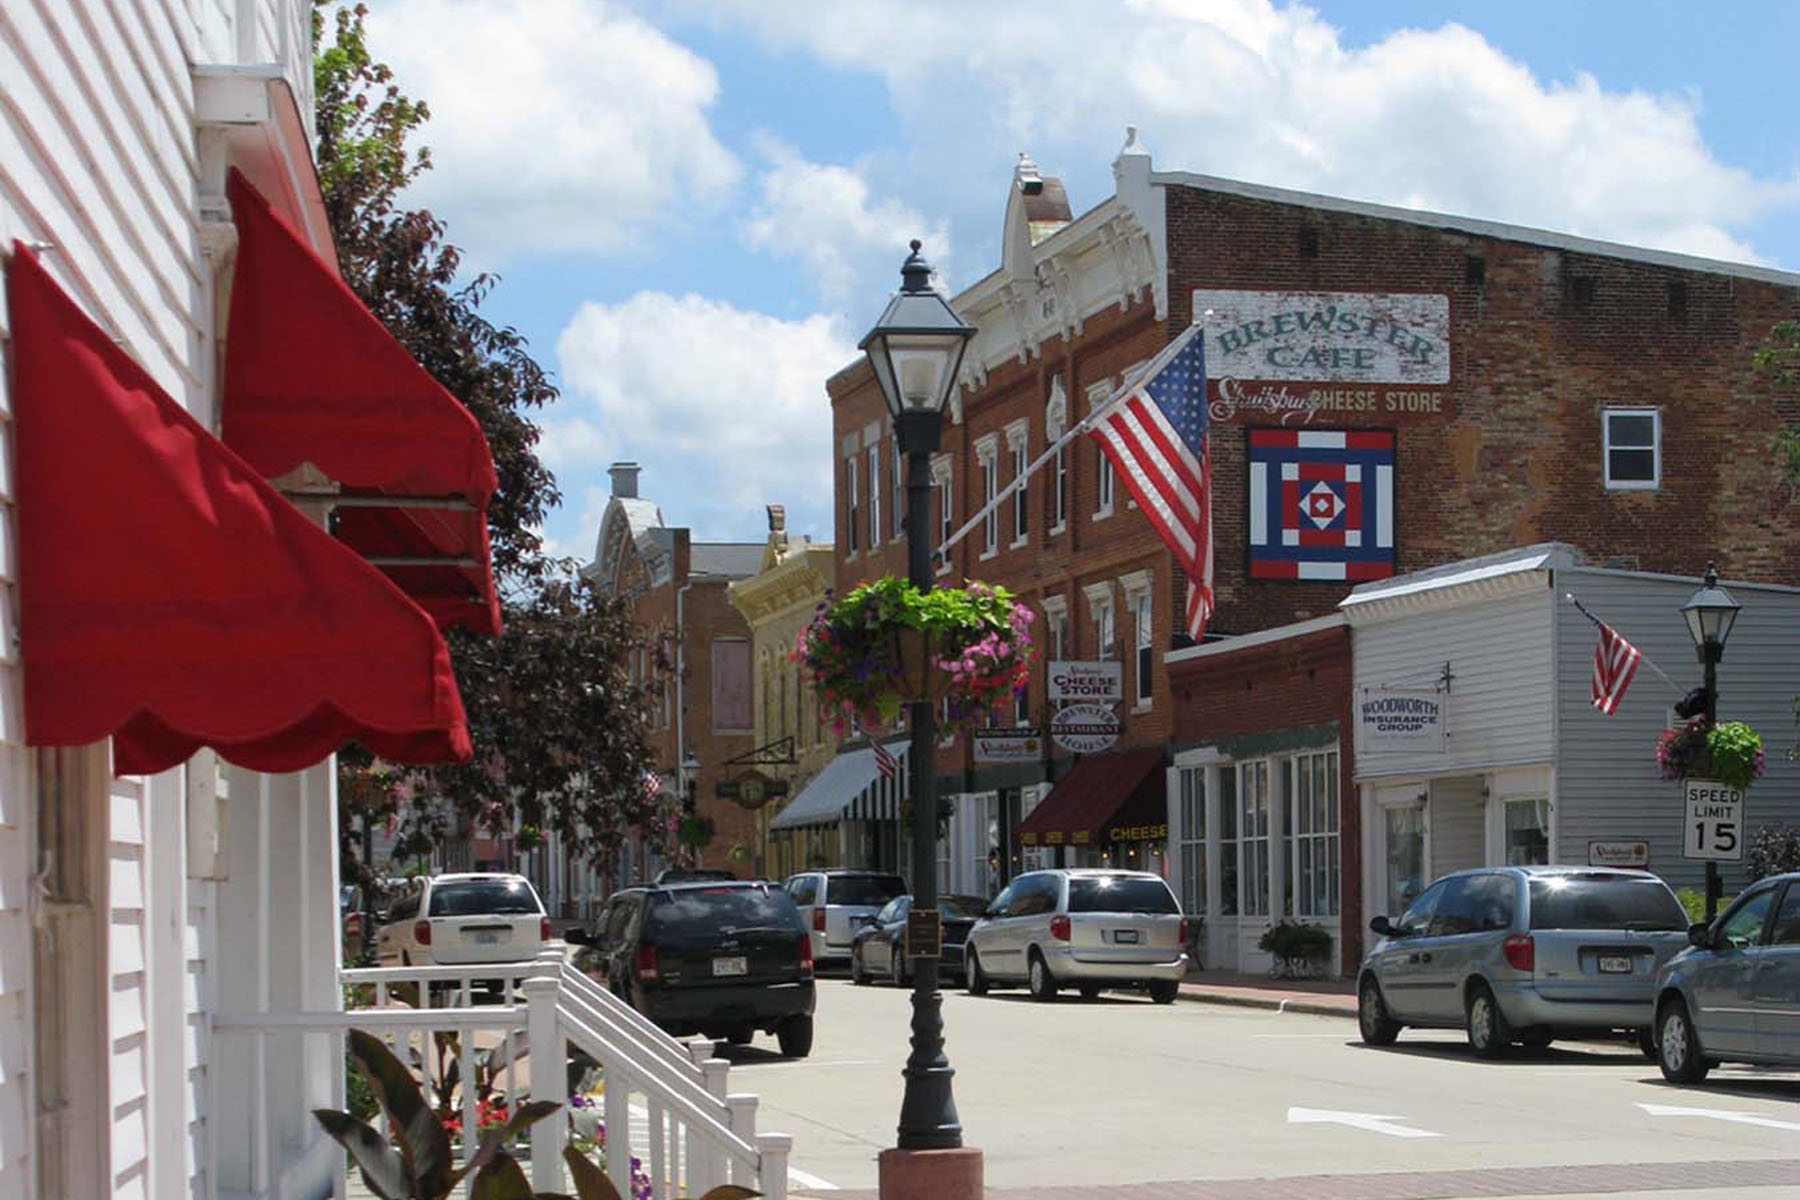 Downtown historic district in Shullsburg.